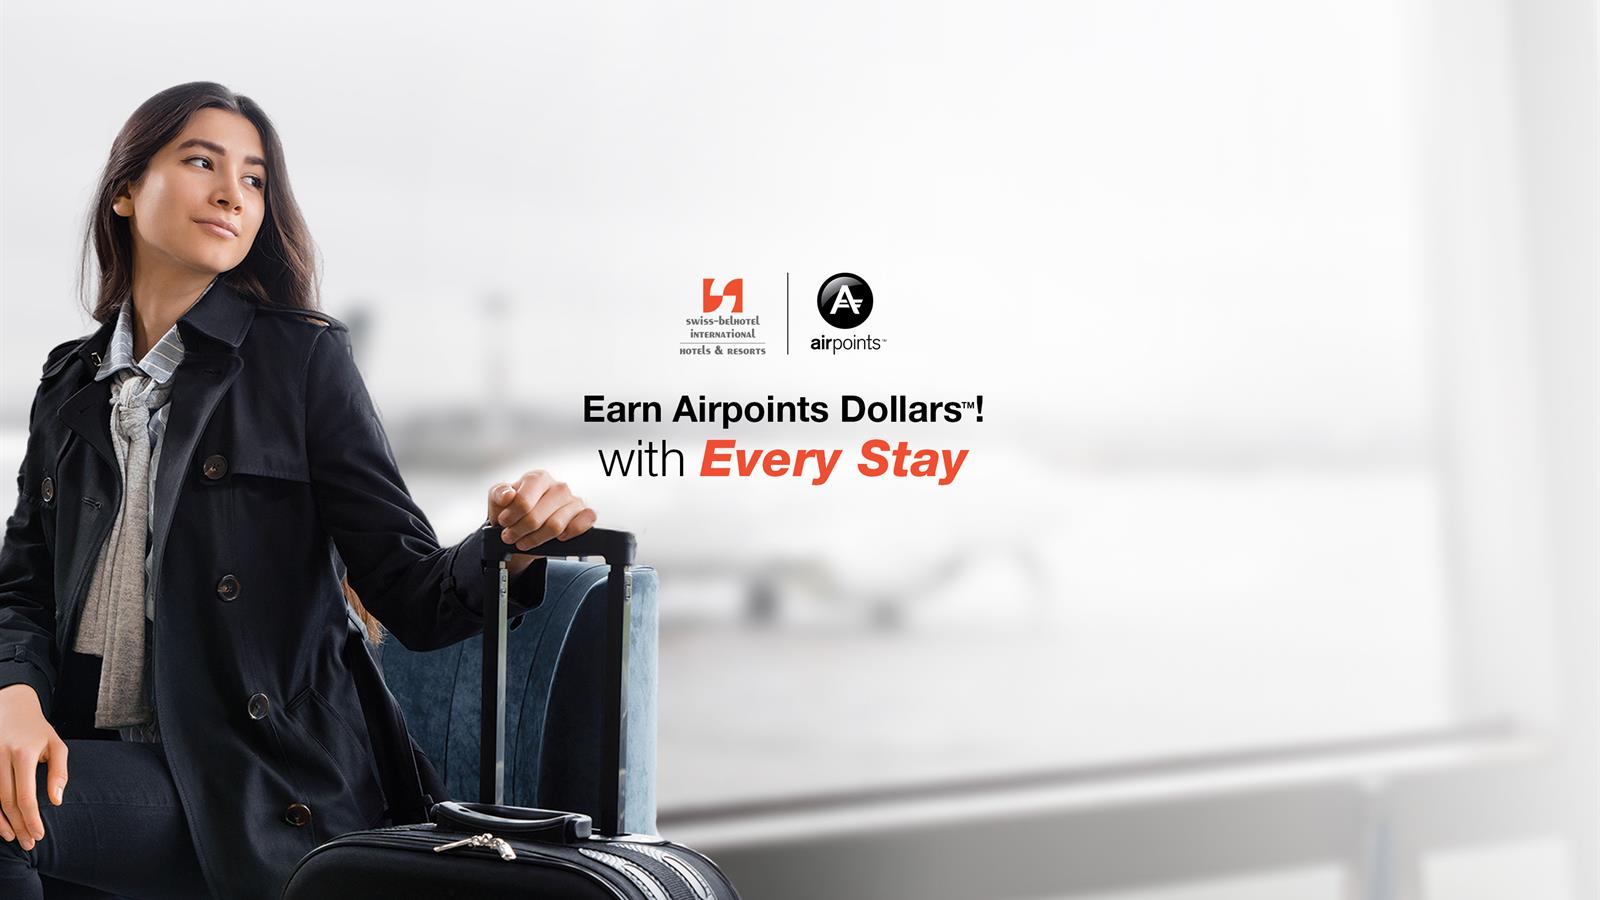 Book your stay with Swiss-Belhotel International and earn Airpoints Dollars™